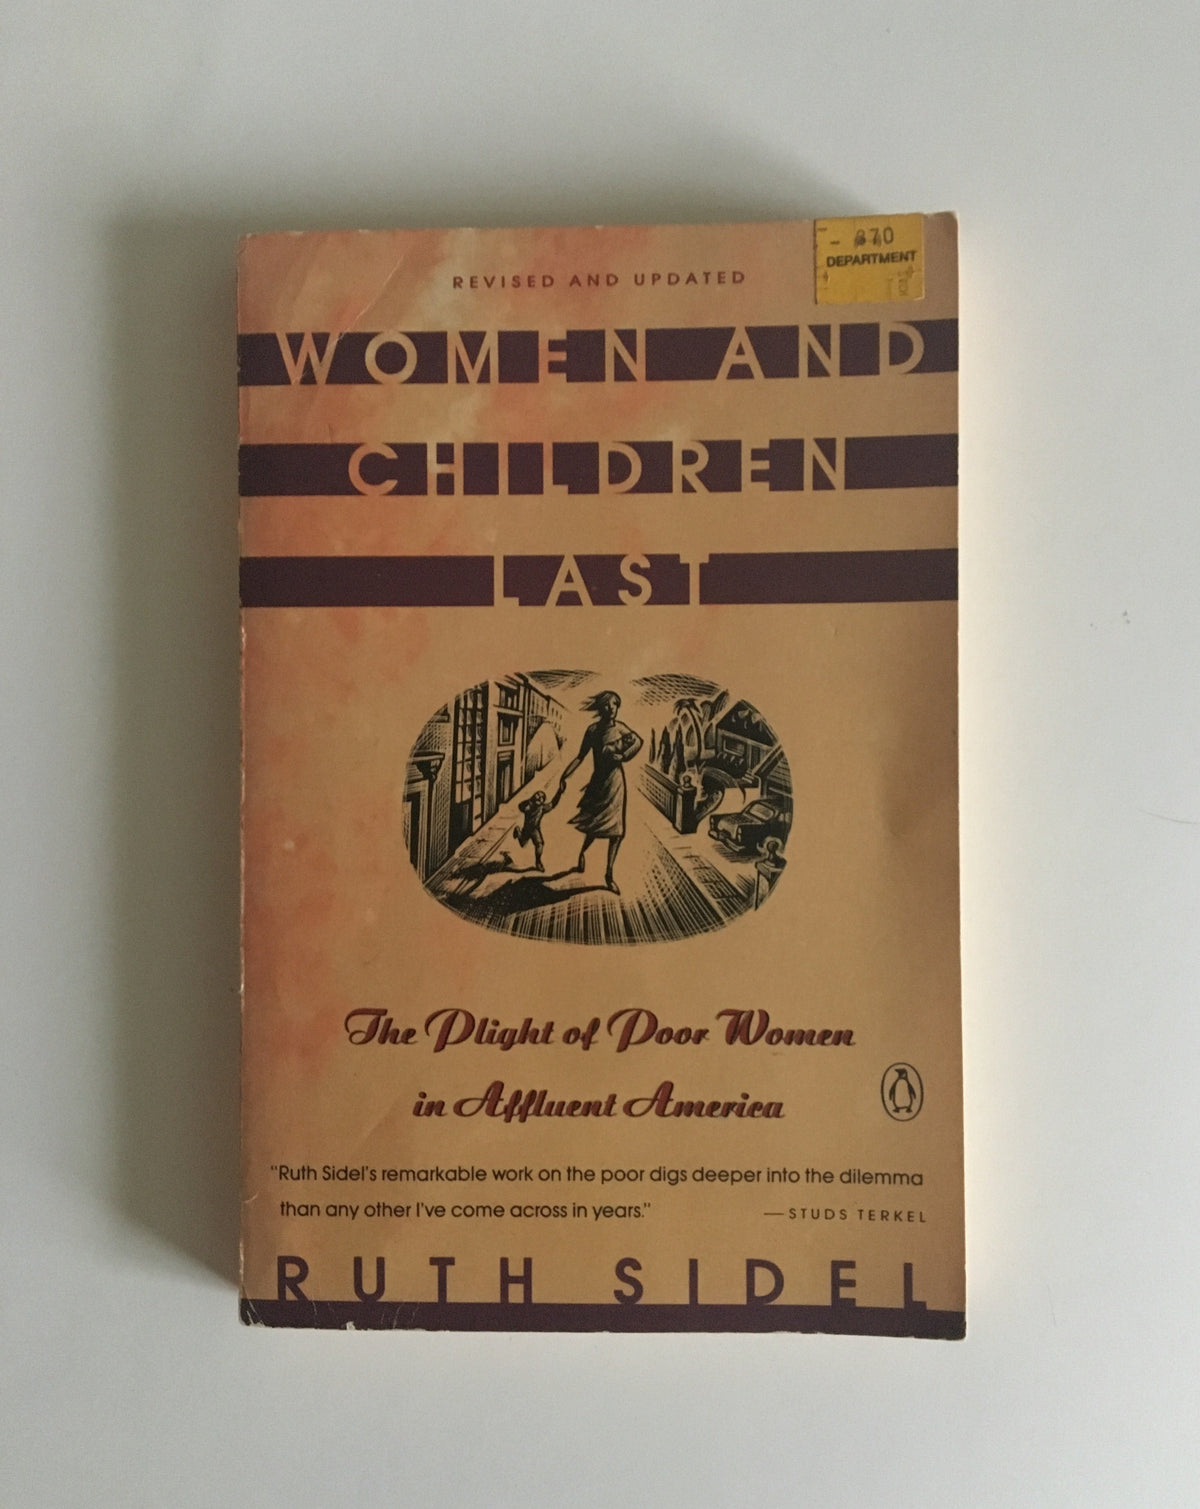 Women and Children Last: The Plight of Poor Women in Affluent America by Ruth Sidel